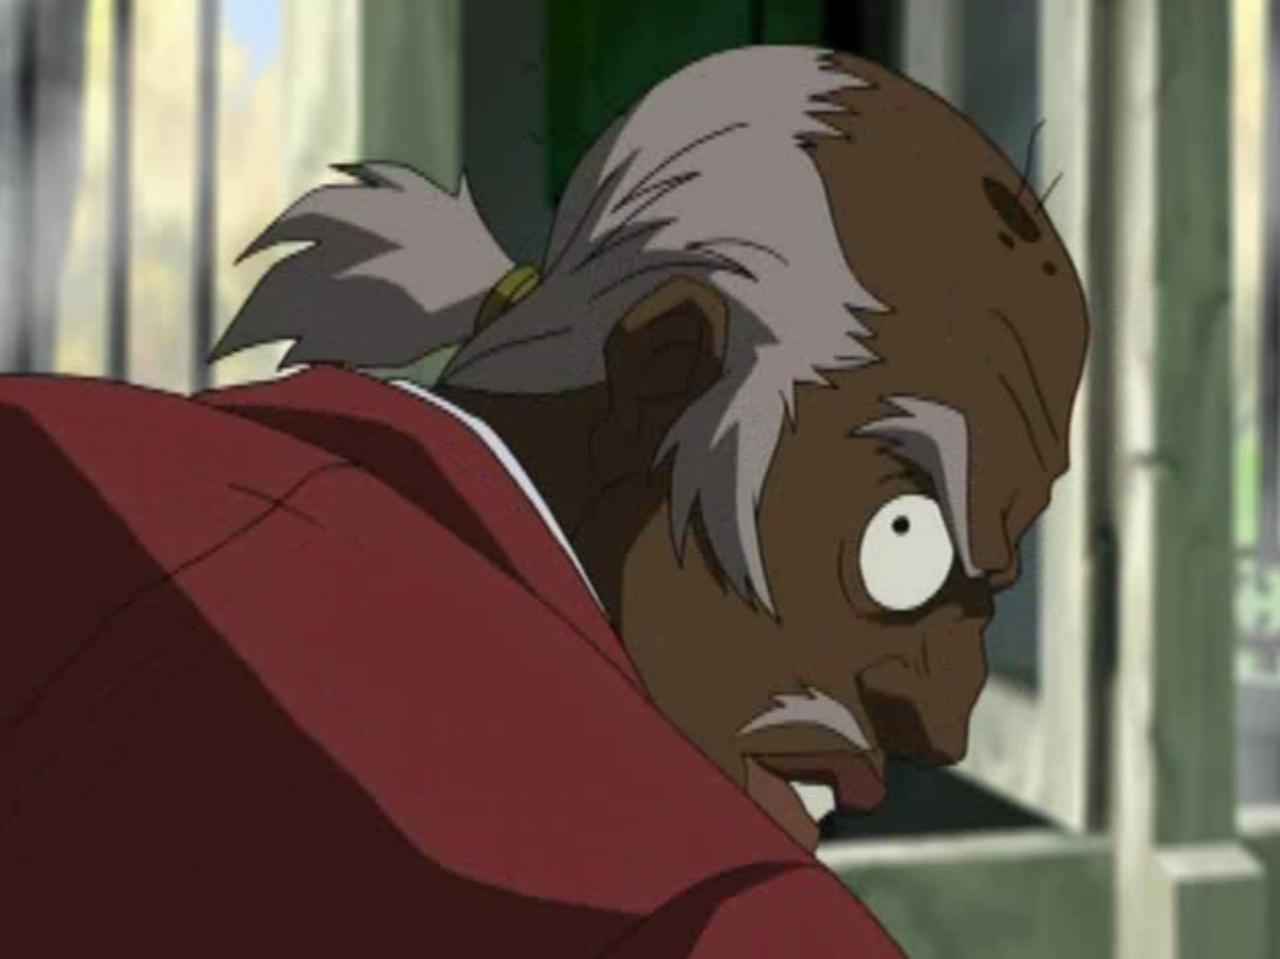 Fox And Friends Find Reverend Uncle Ruckus To Badmouth Black People | Crooks and Liars1280 x 959